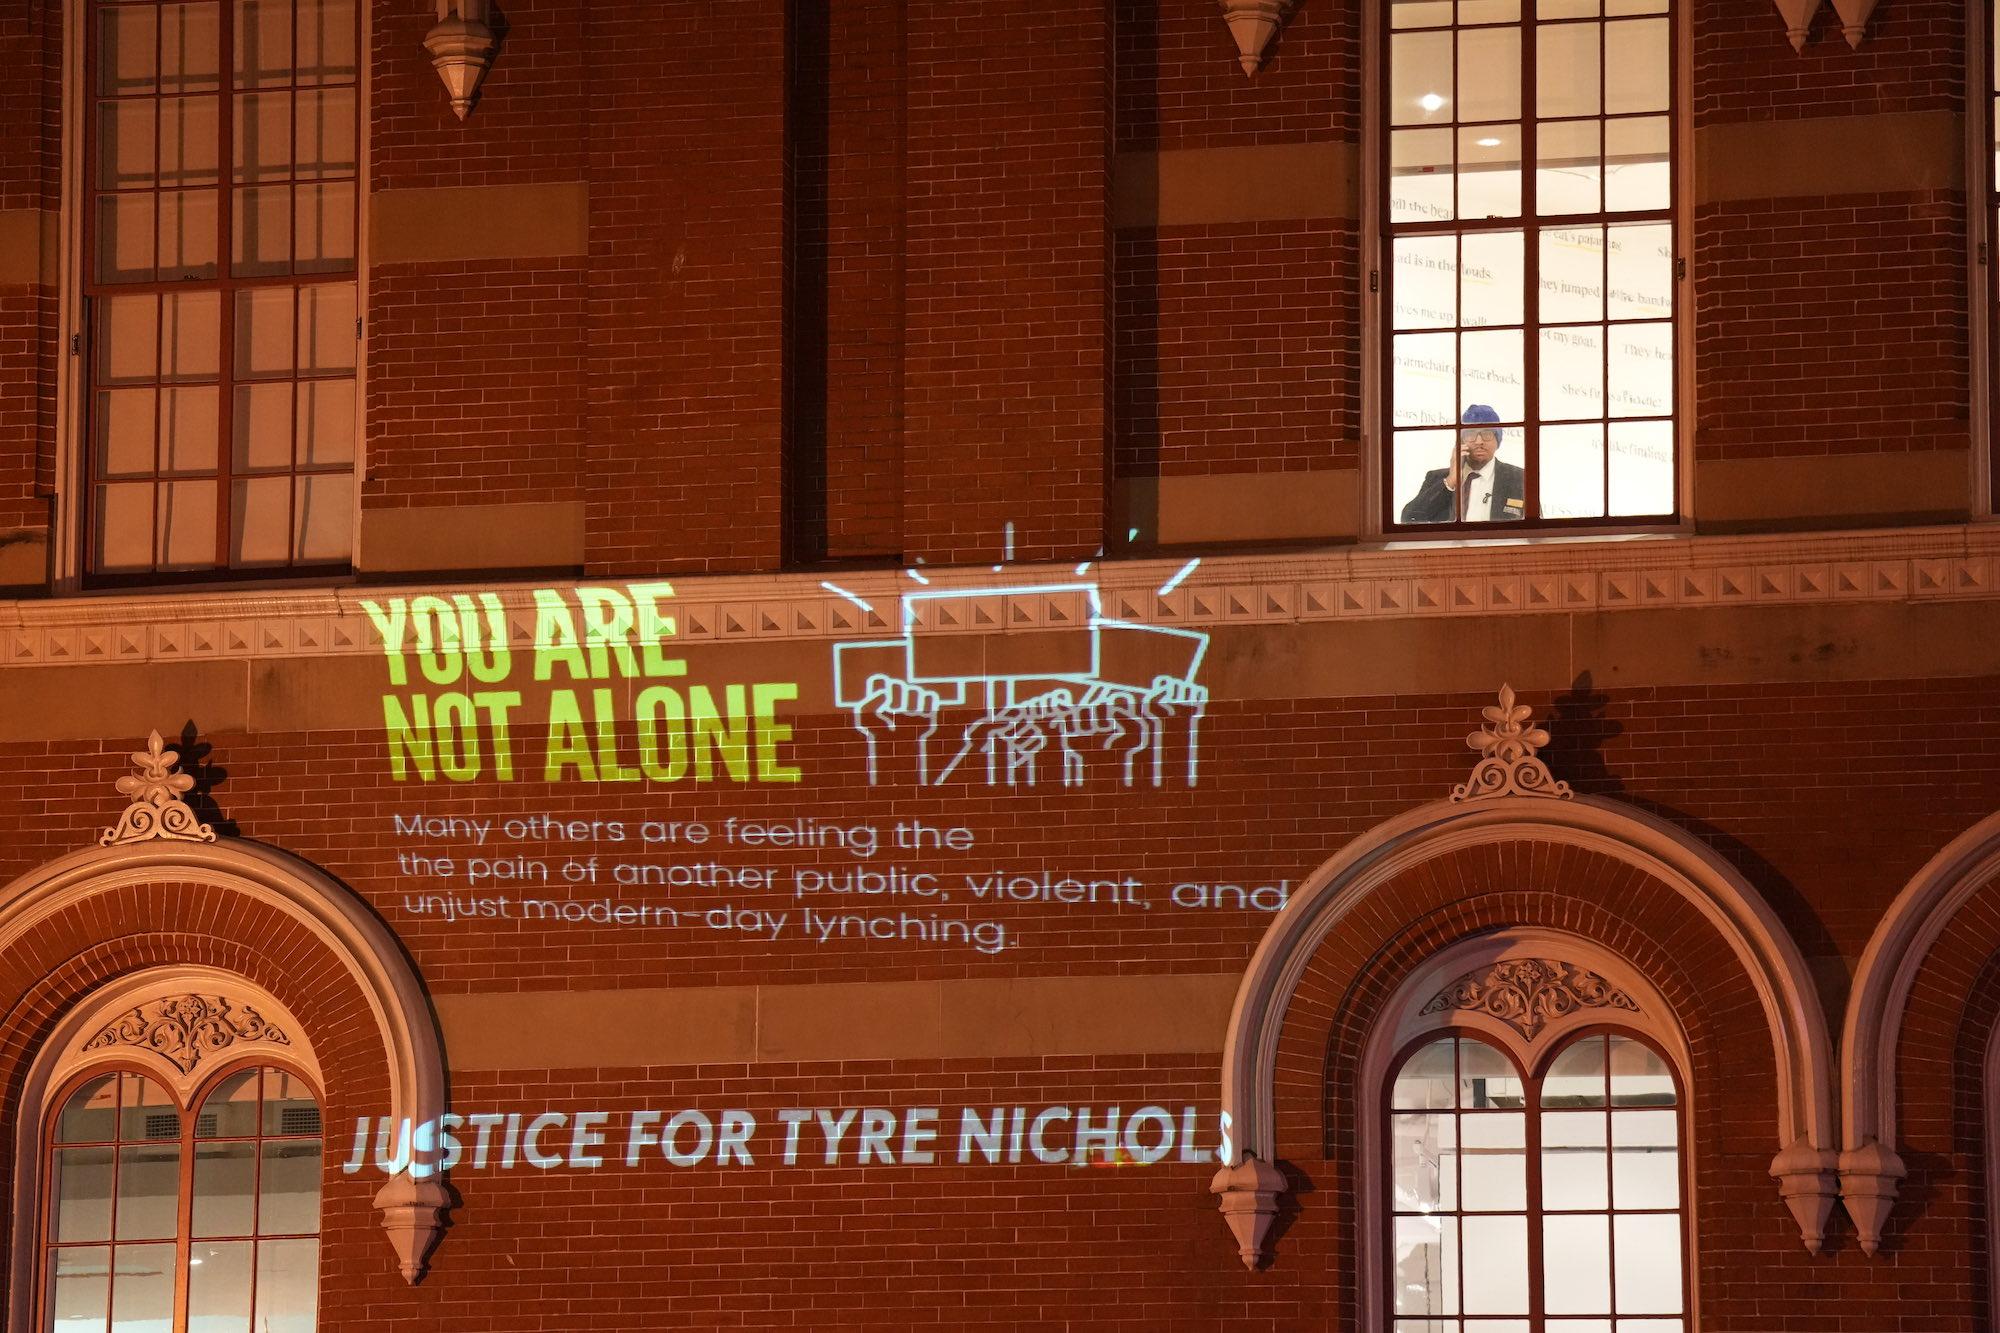 "You are not alone Justice for Tyre Nichols" wall projection protest in Washington DC